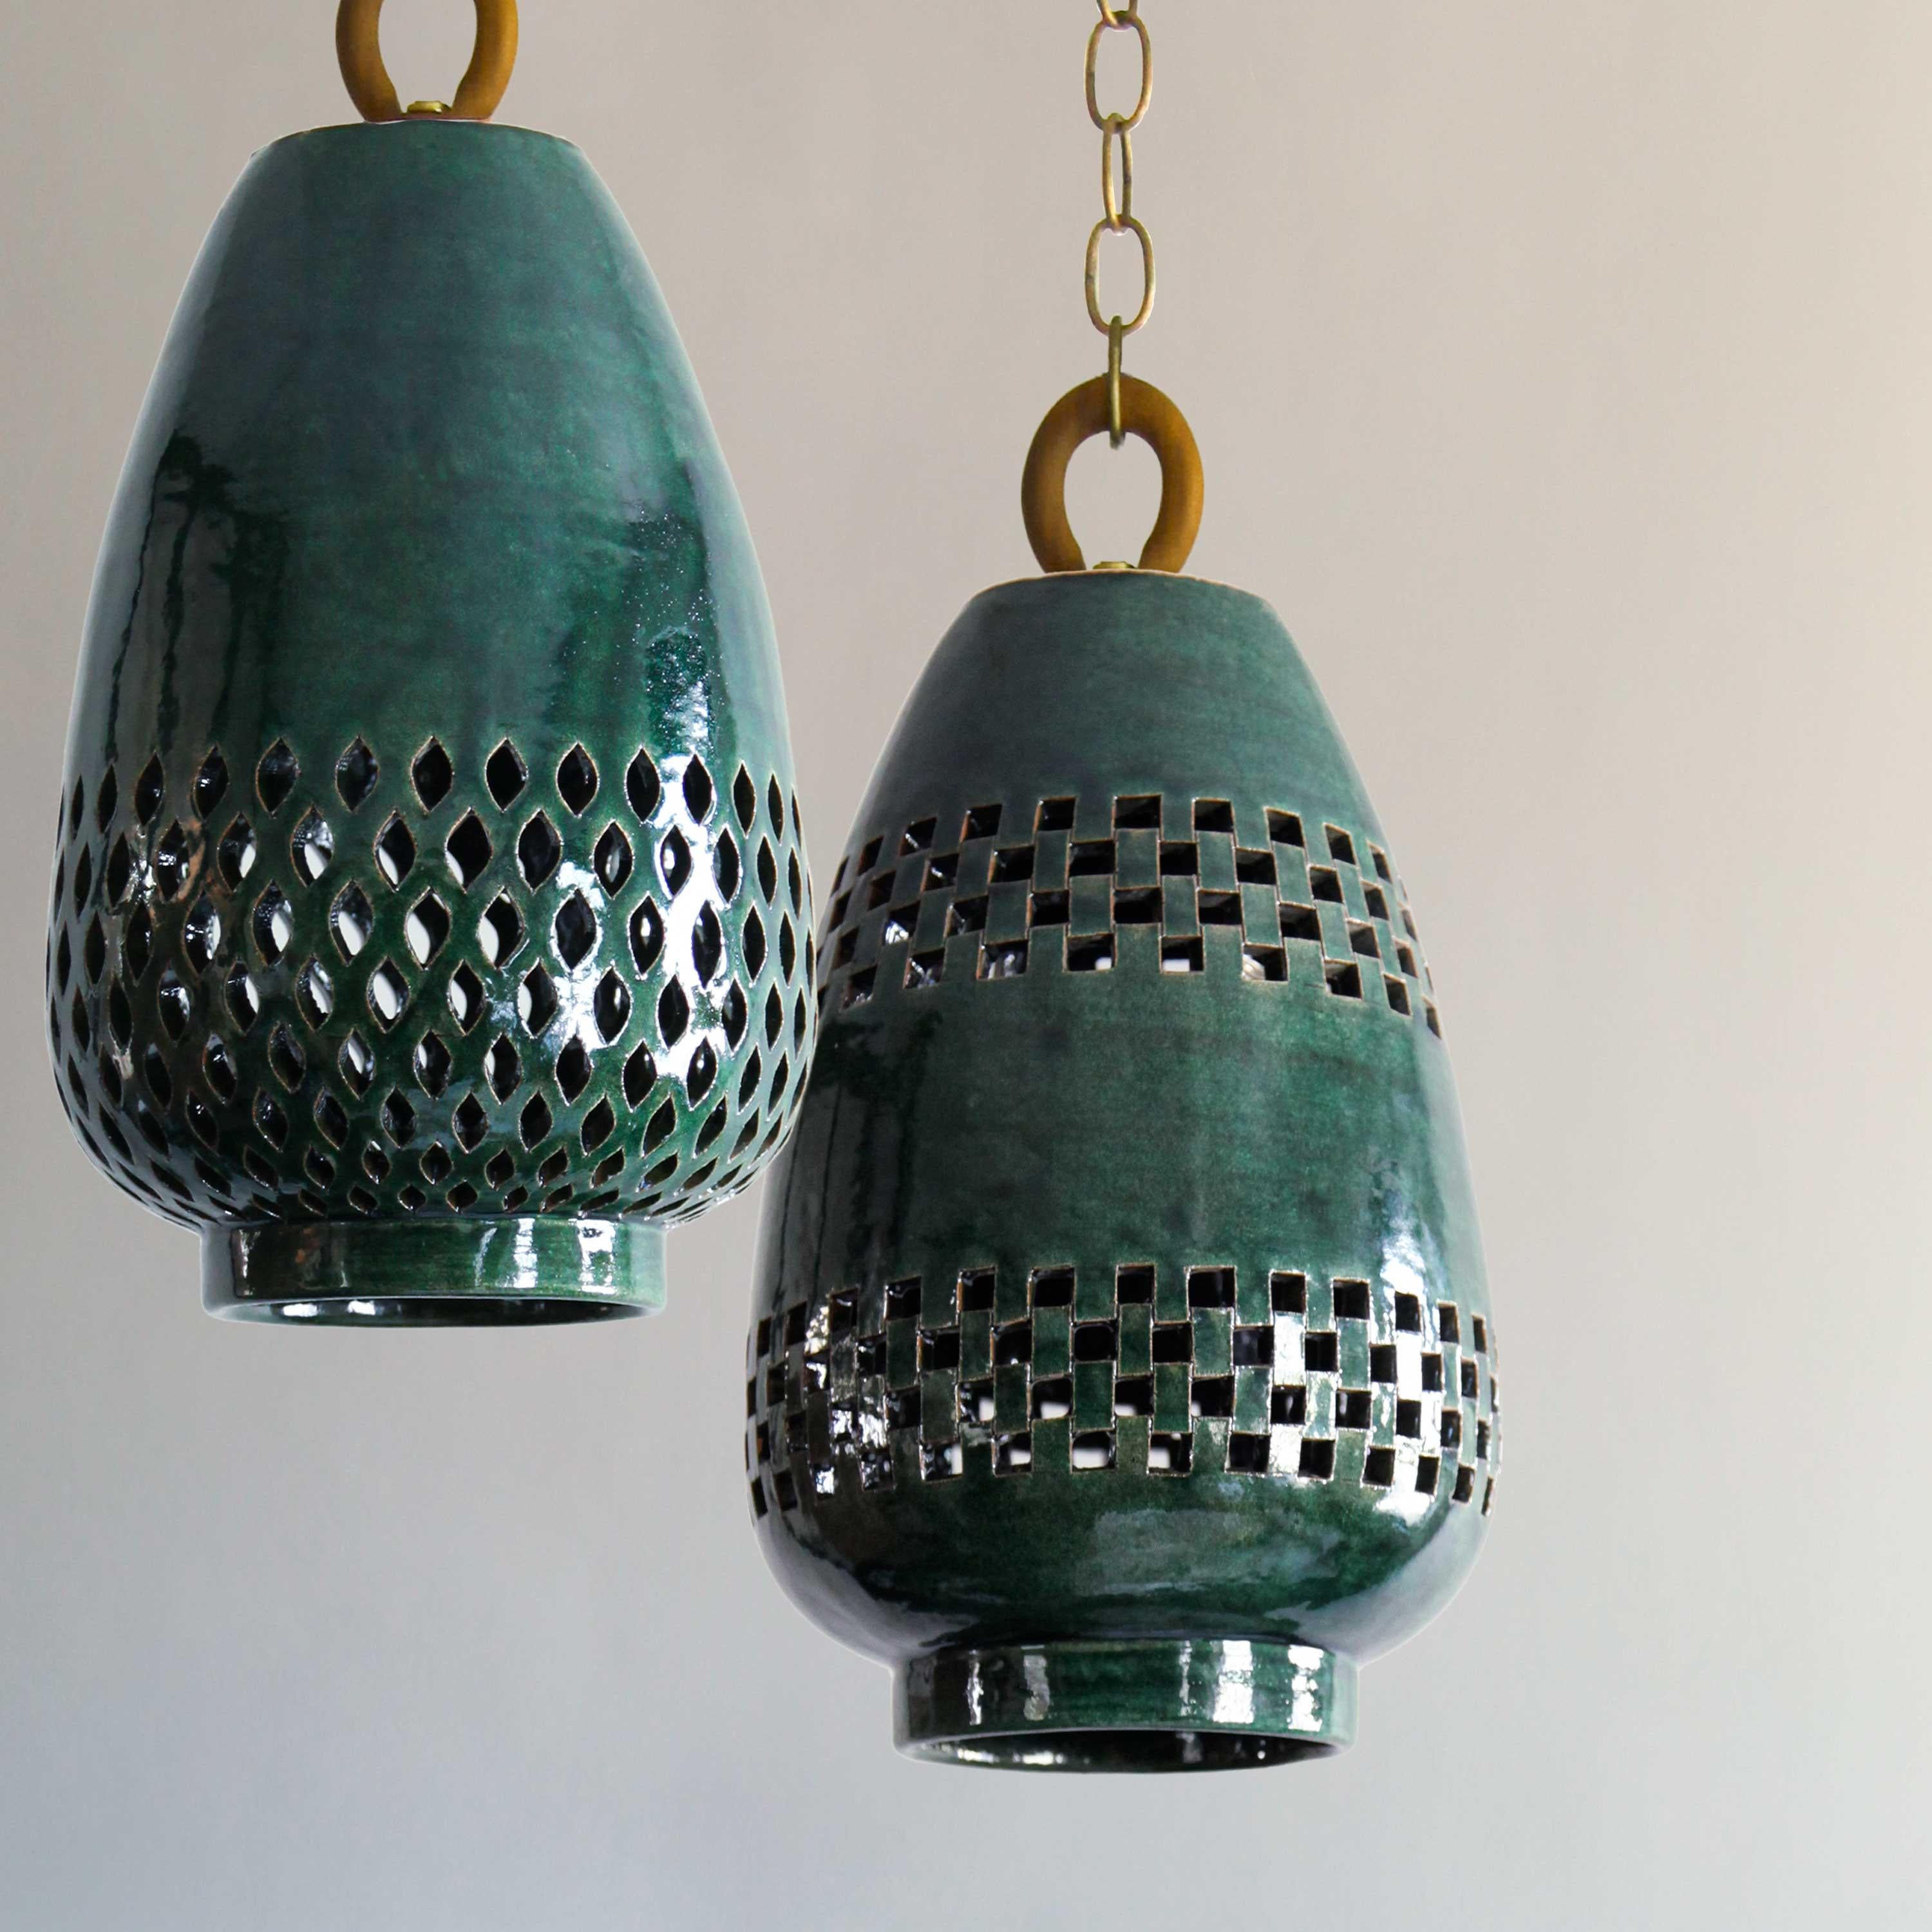 Mid-Century Modern Small Emerald Ceramic Pendant Light, Brushed Brass, Ajedrez Atzompa Collection For Sale